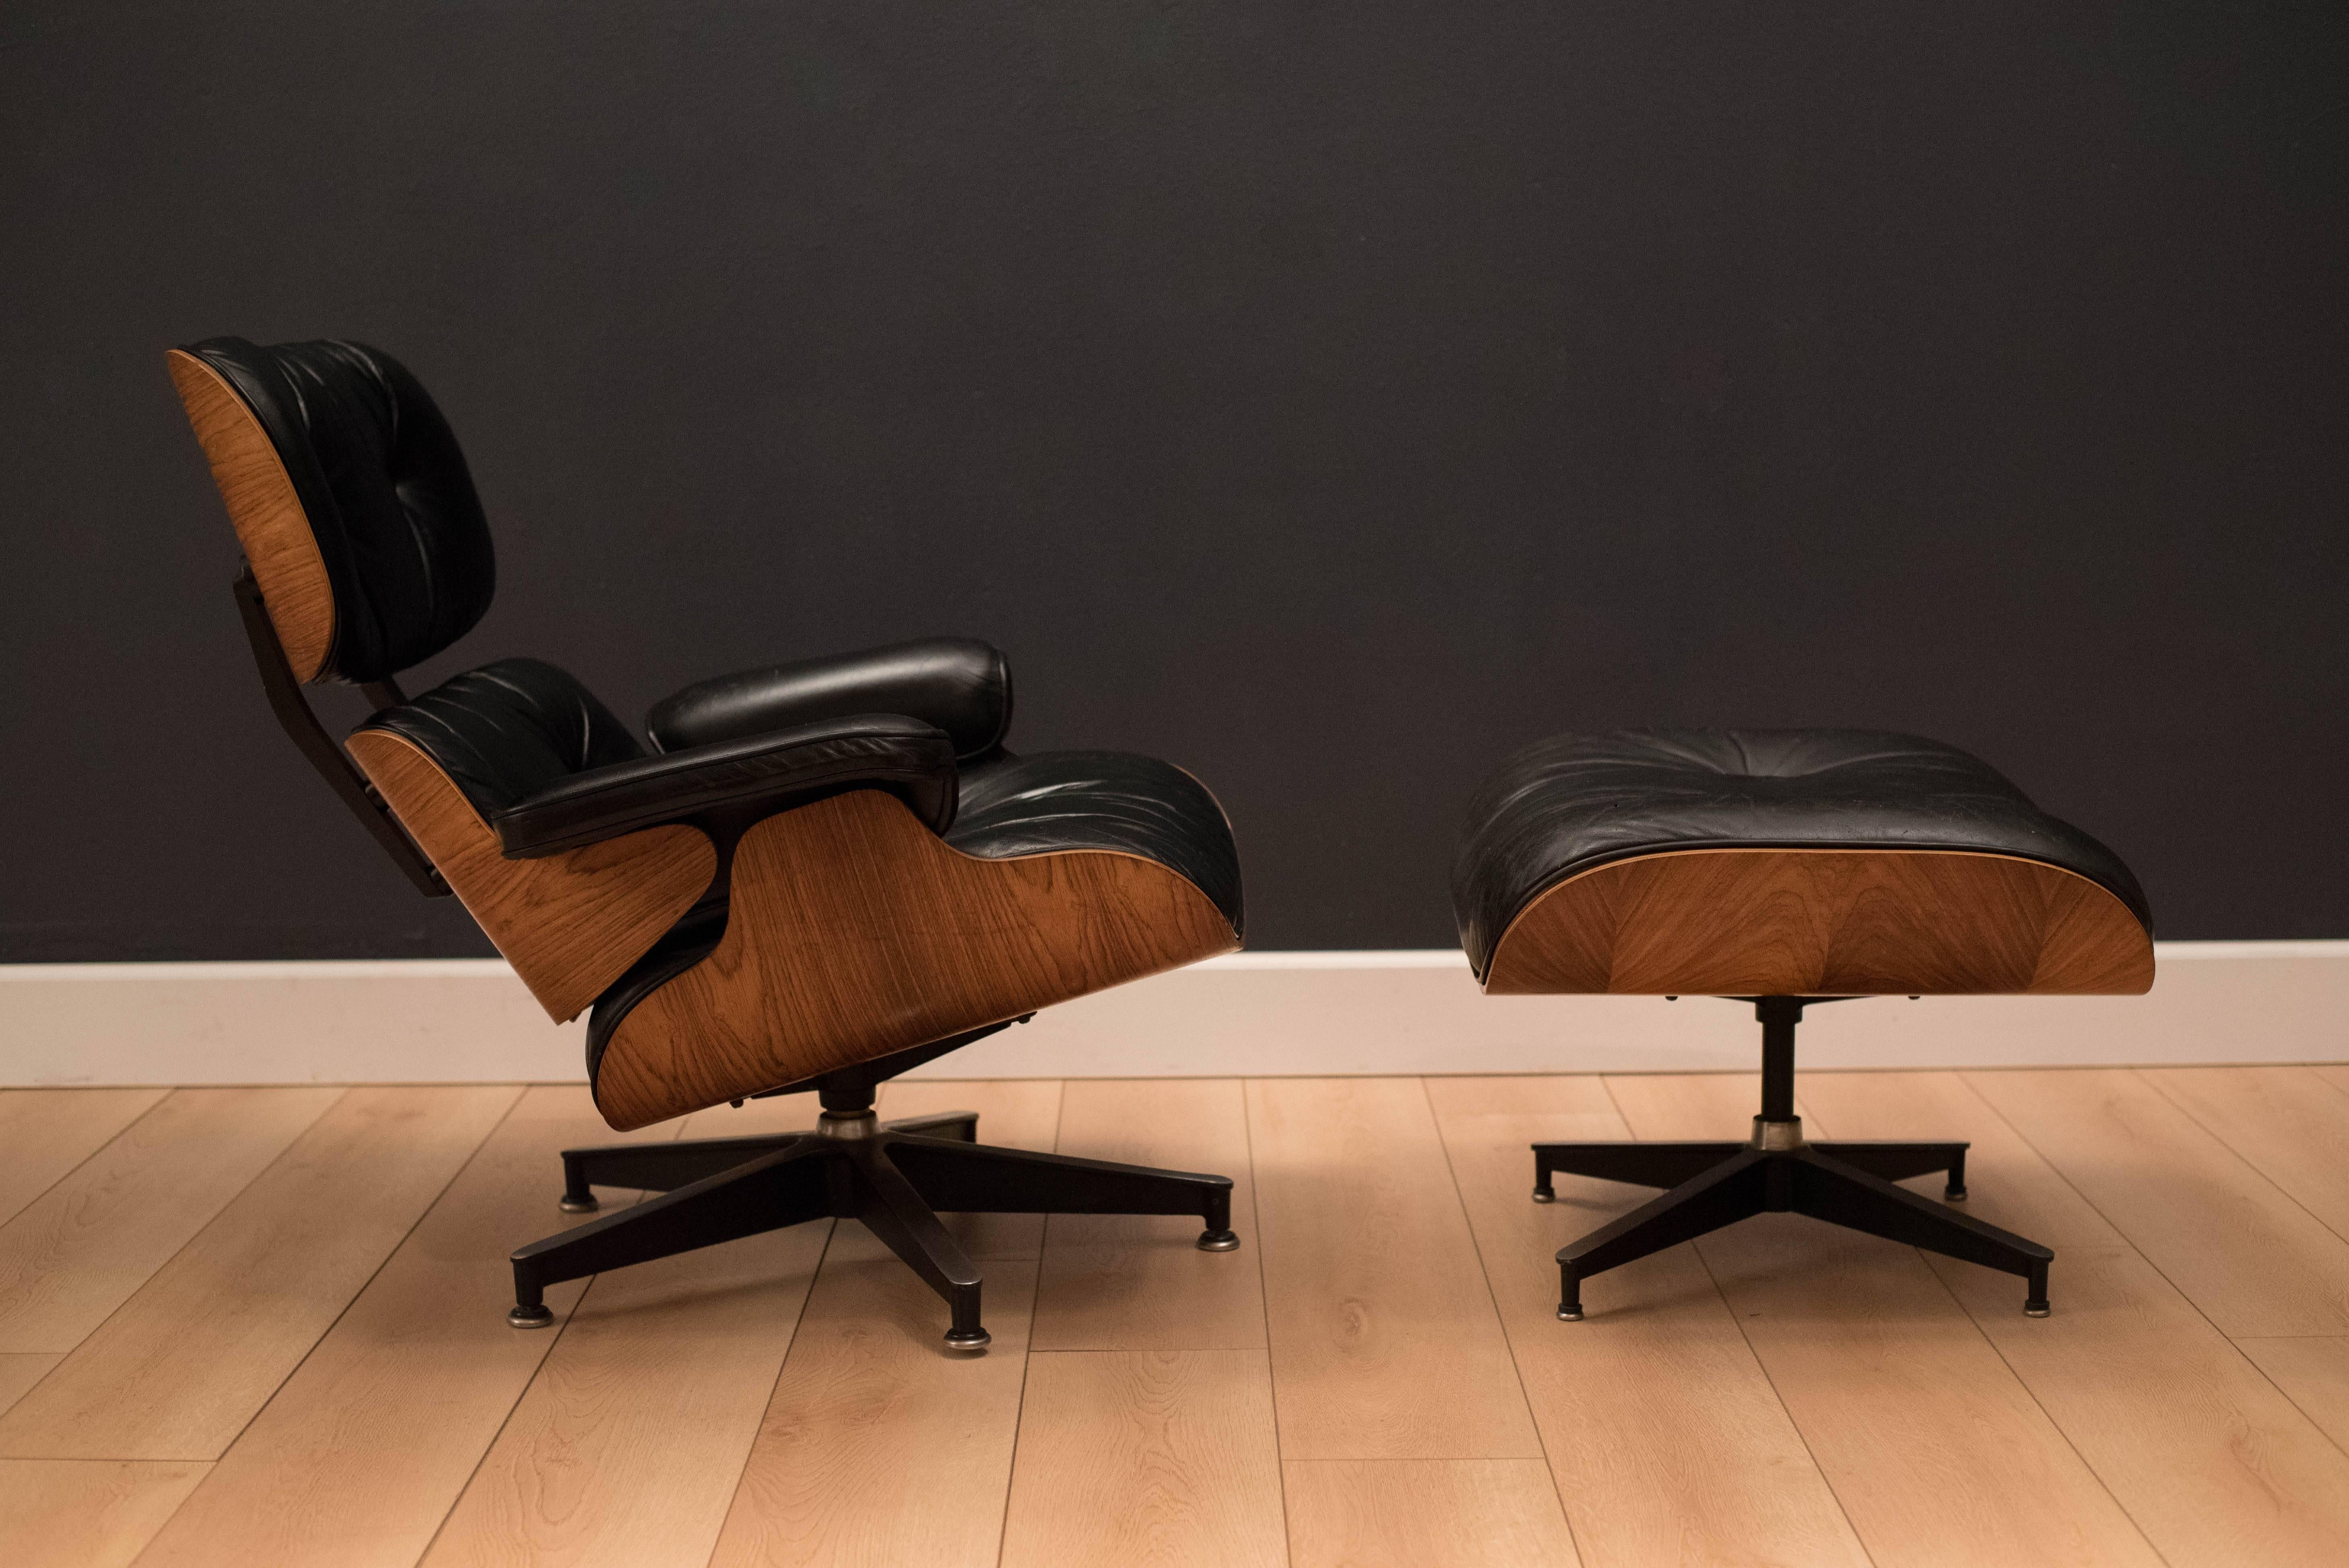 Mid-Century Modern 670 lounge chair and 671 ottoman designed by Charles and Ray Eames for Herman Miller. This iconic piece features a rosewood shell case and original black leather upholstery.

Ottoman: 26